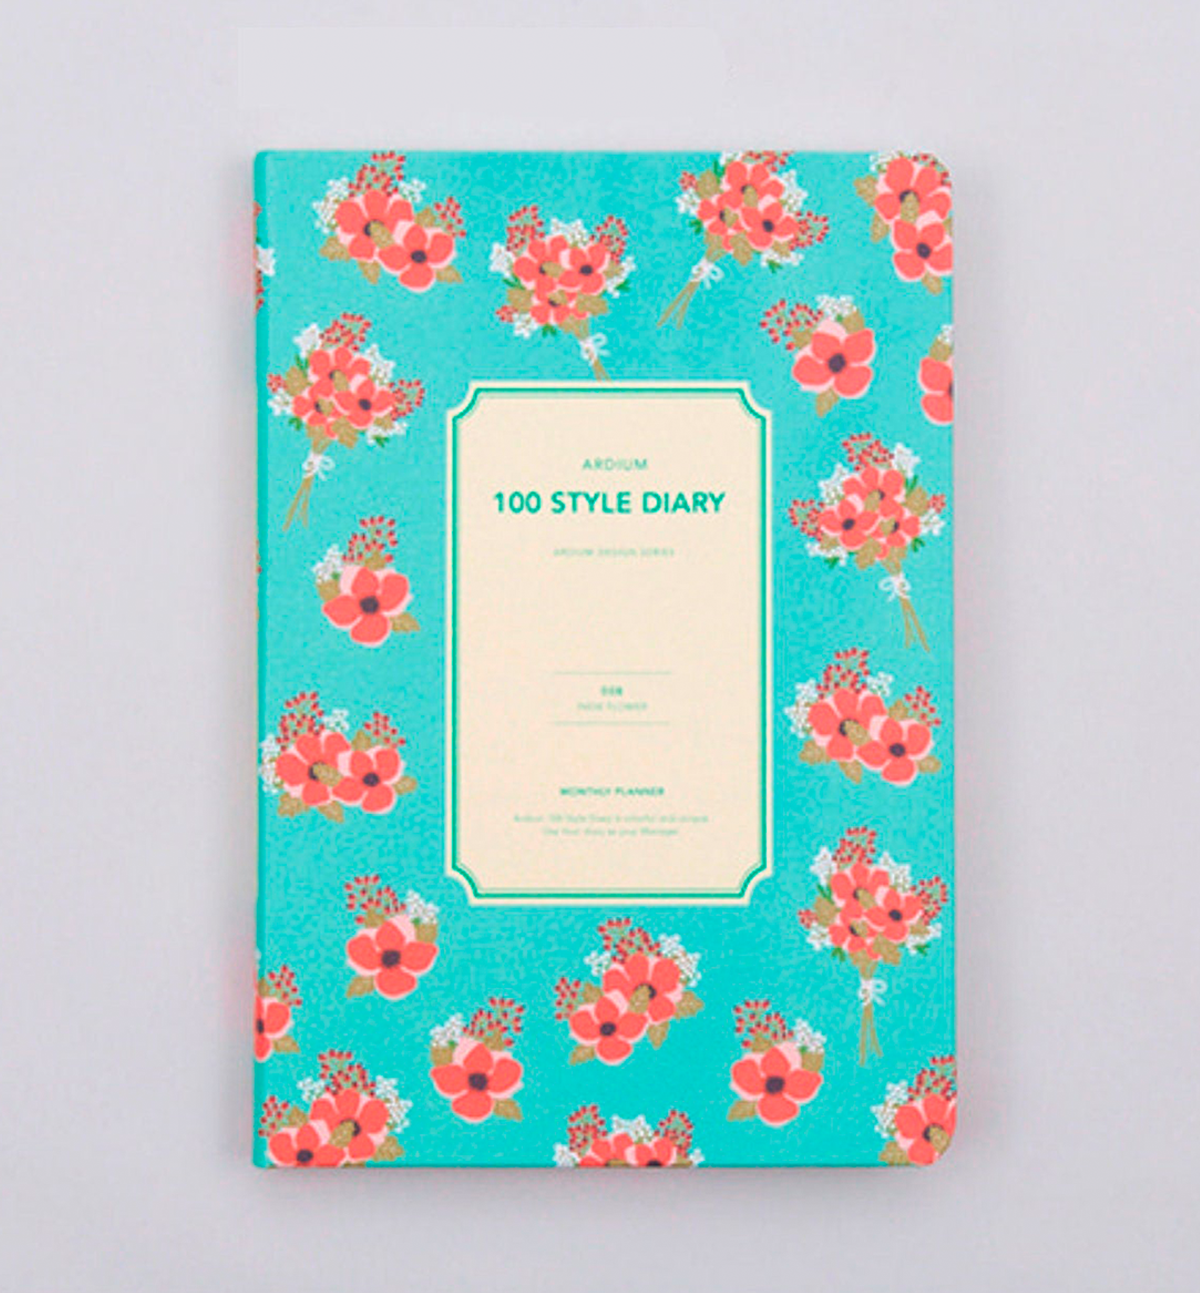 100 Style Diary [Indie Flower]